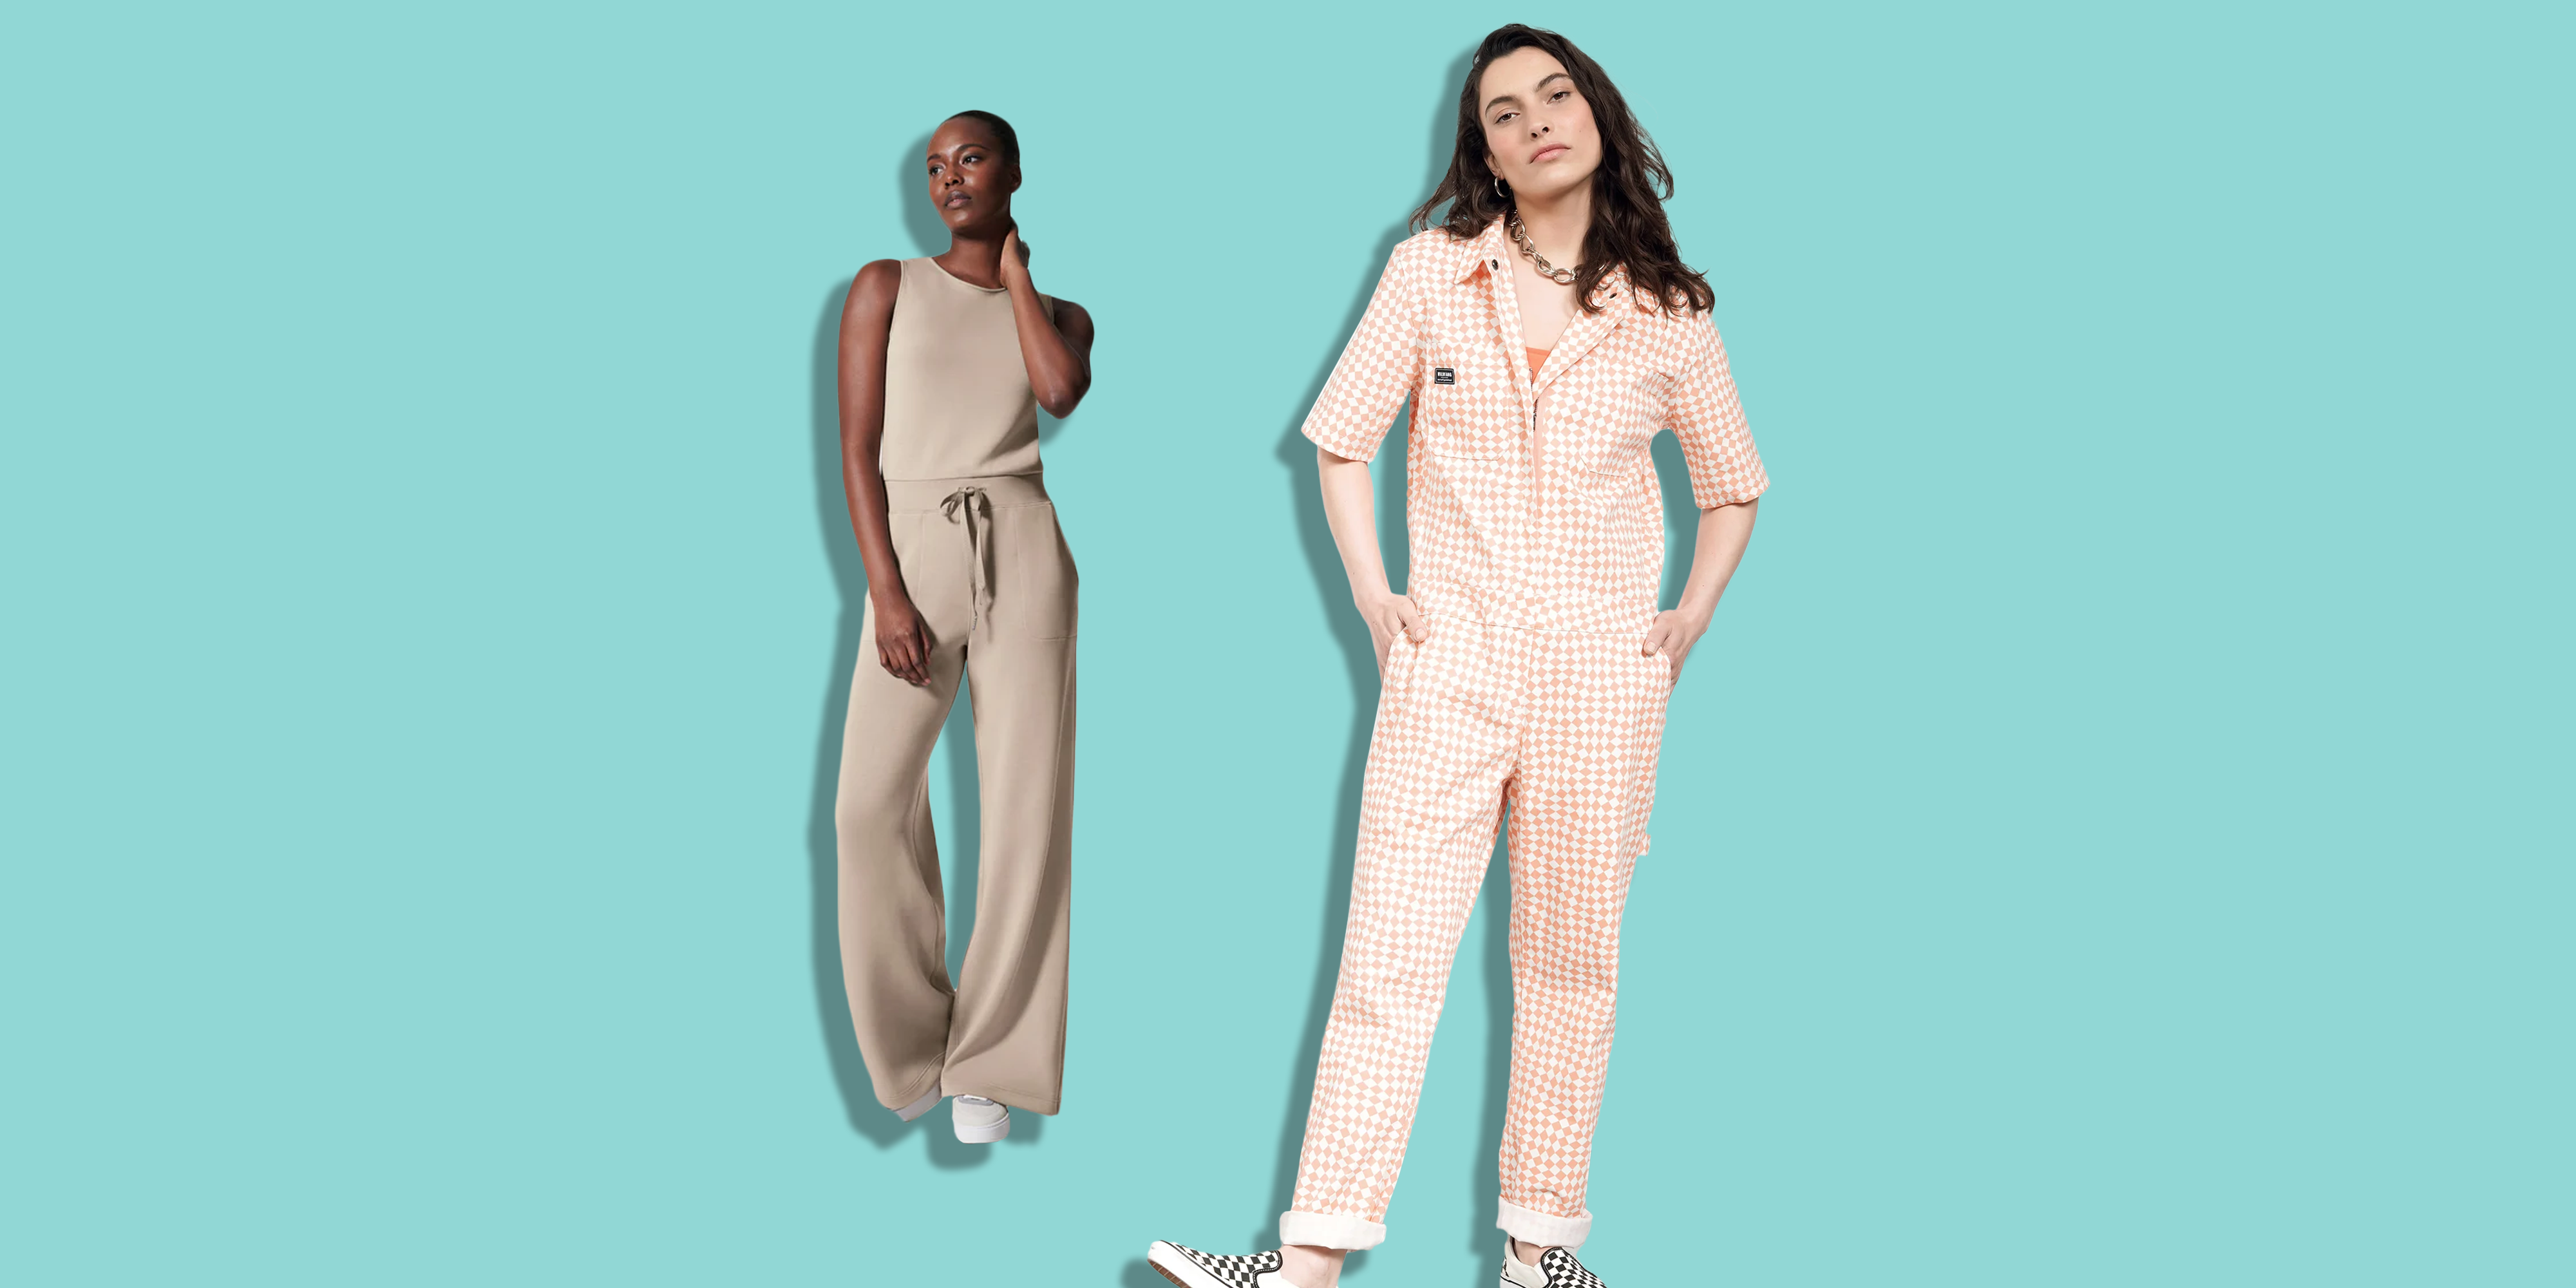 iThinksew  Patterns and More  Dungarees Overall  Jumpsuit PDF Sewing  Pattern A4 US Letter A0 EU 34  44 US 414 UK 616